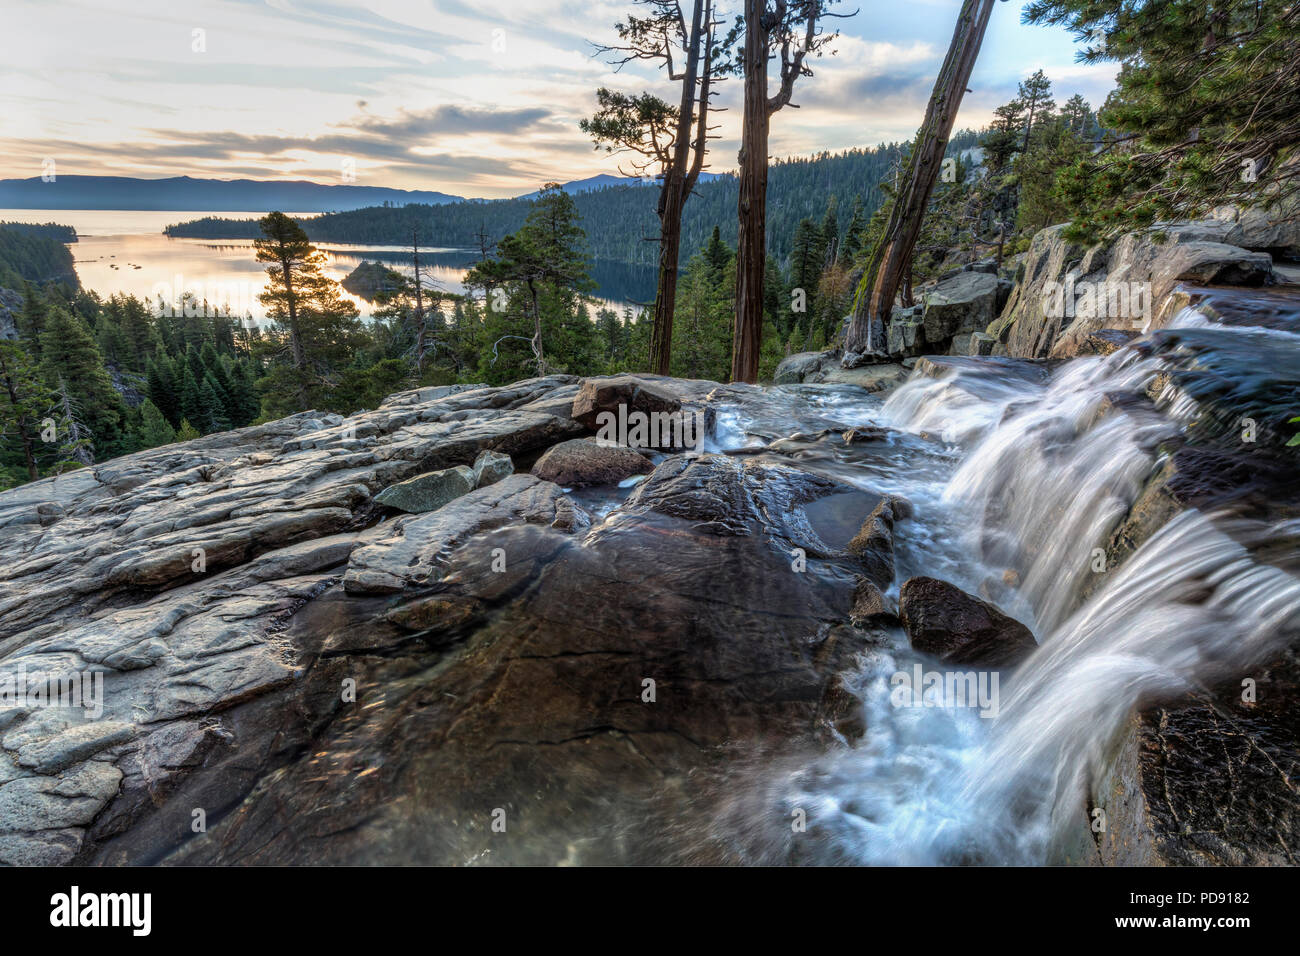 Colorful sunrise on Emerald Bay from the top of Eagle Falls off Lake Tahoe in California. Stock Photo